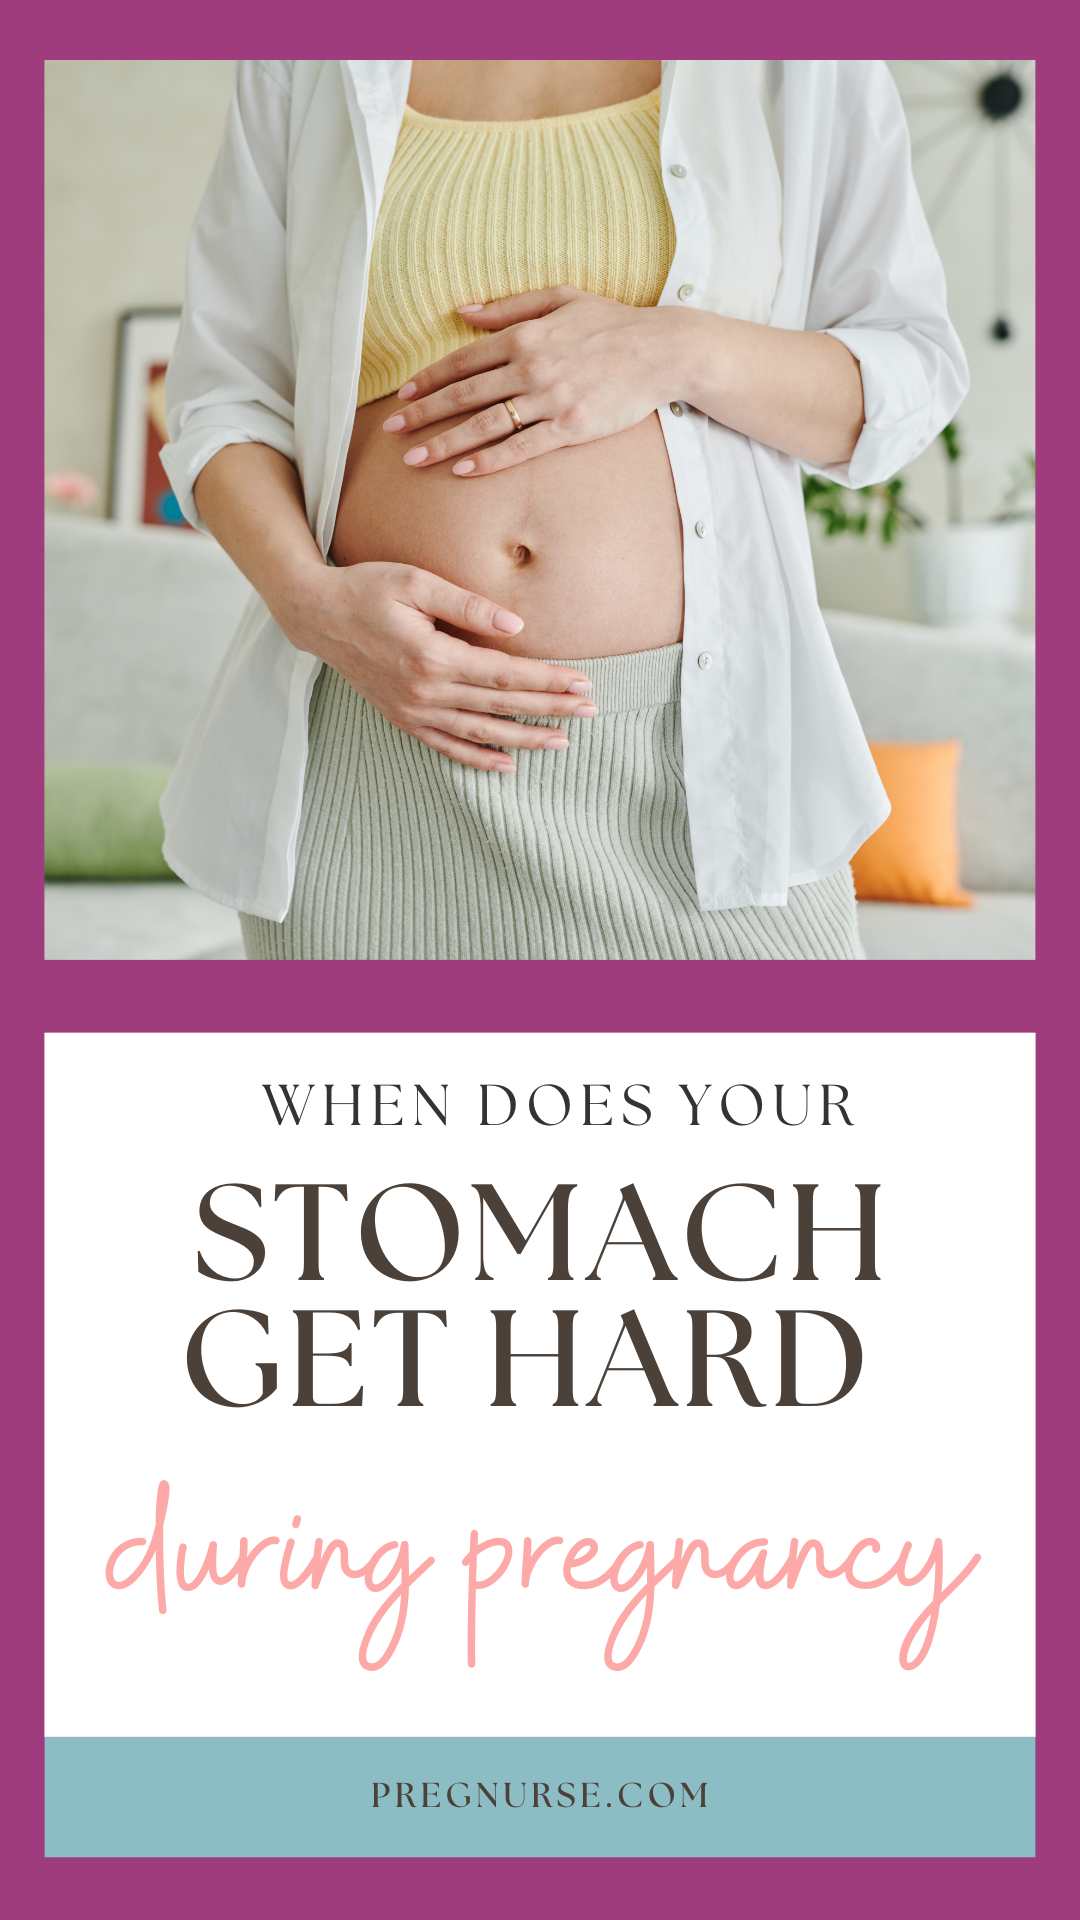 Are you pregnant and wondering when your stomach will start to get hard? It can be a bit of a mystery, with each woman experiencing her own individual journey. However, there are some general points to keep in mind when tracking your physical changes as you go through your pregnancy. In this article, we will discuss the typical timeline of when your stomach starts to get hard and other important signs to look out for. Read on to learn more about your pregnancy journey!